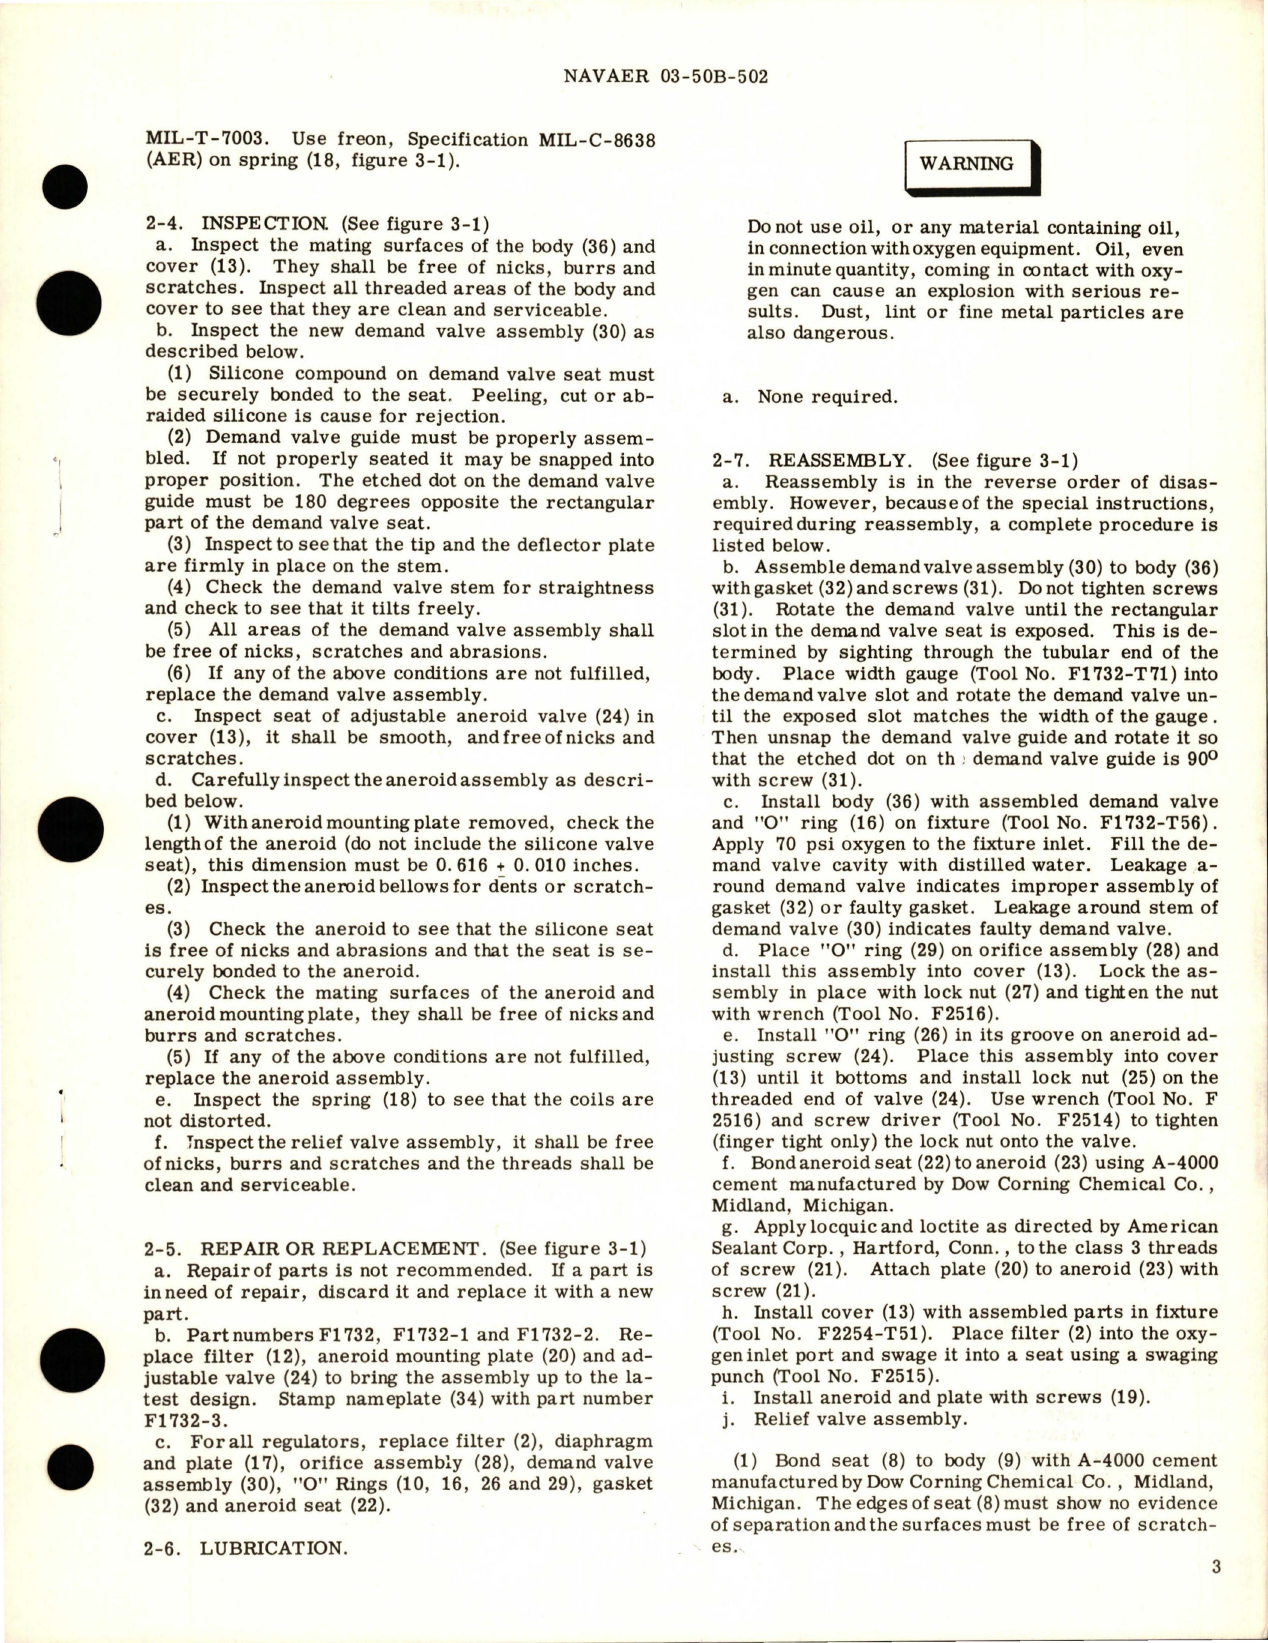 Sample page 5 from AirCorps Library document: Operation, Service, and Overhaul Instructions with Illustrated Parts Breakdown for Automatic Pressure Oxygen Breathing Regulator - Parts F1732, F1732-1, F1732-2, and F1732-3